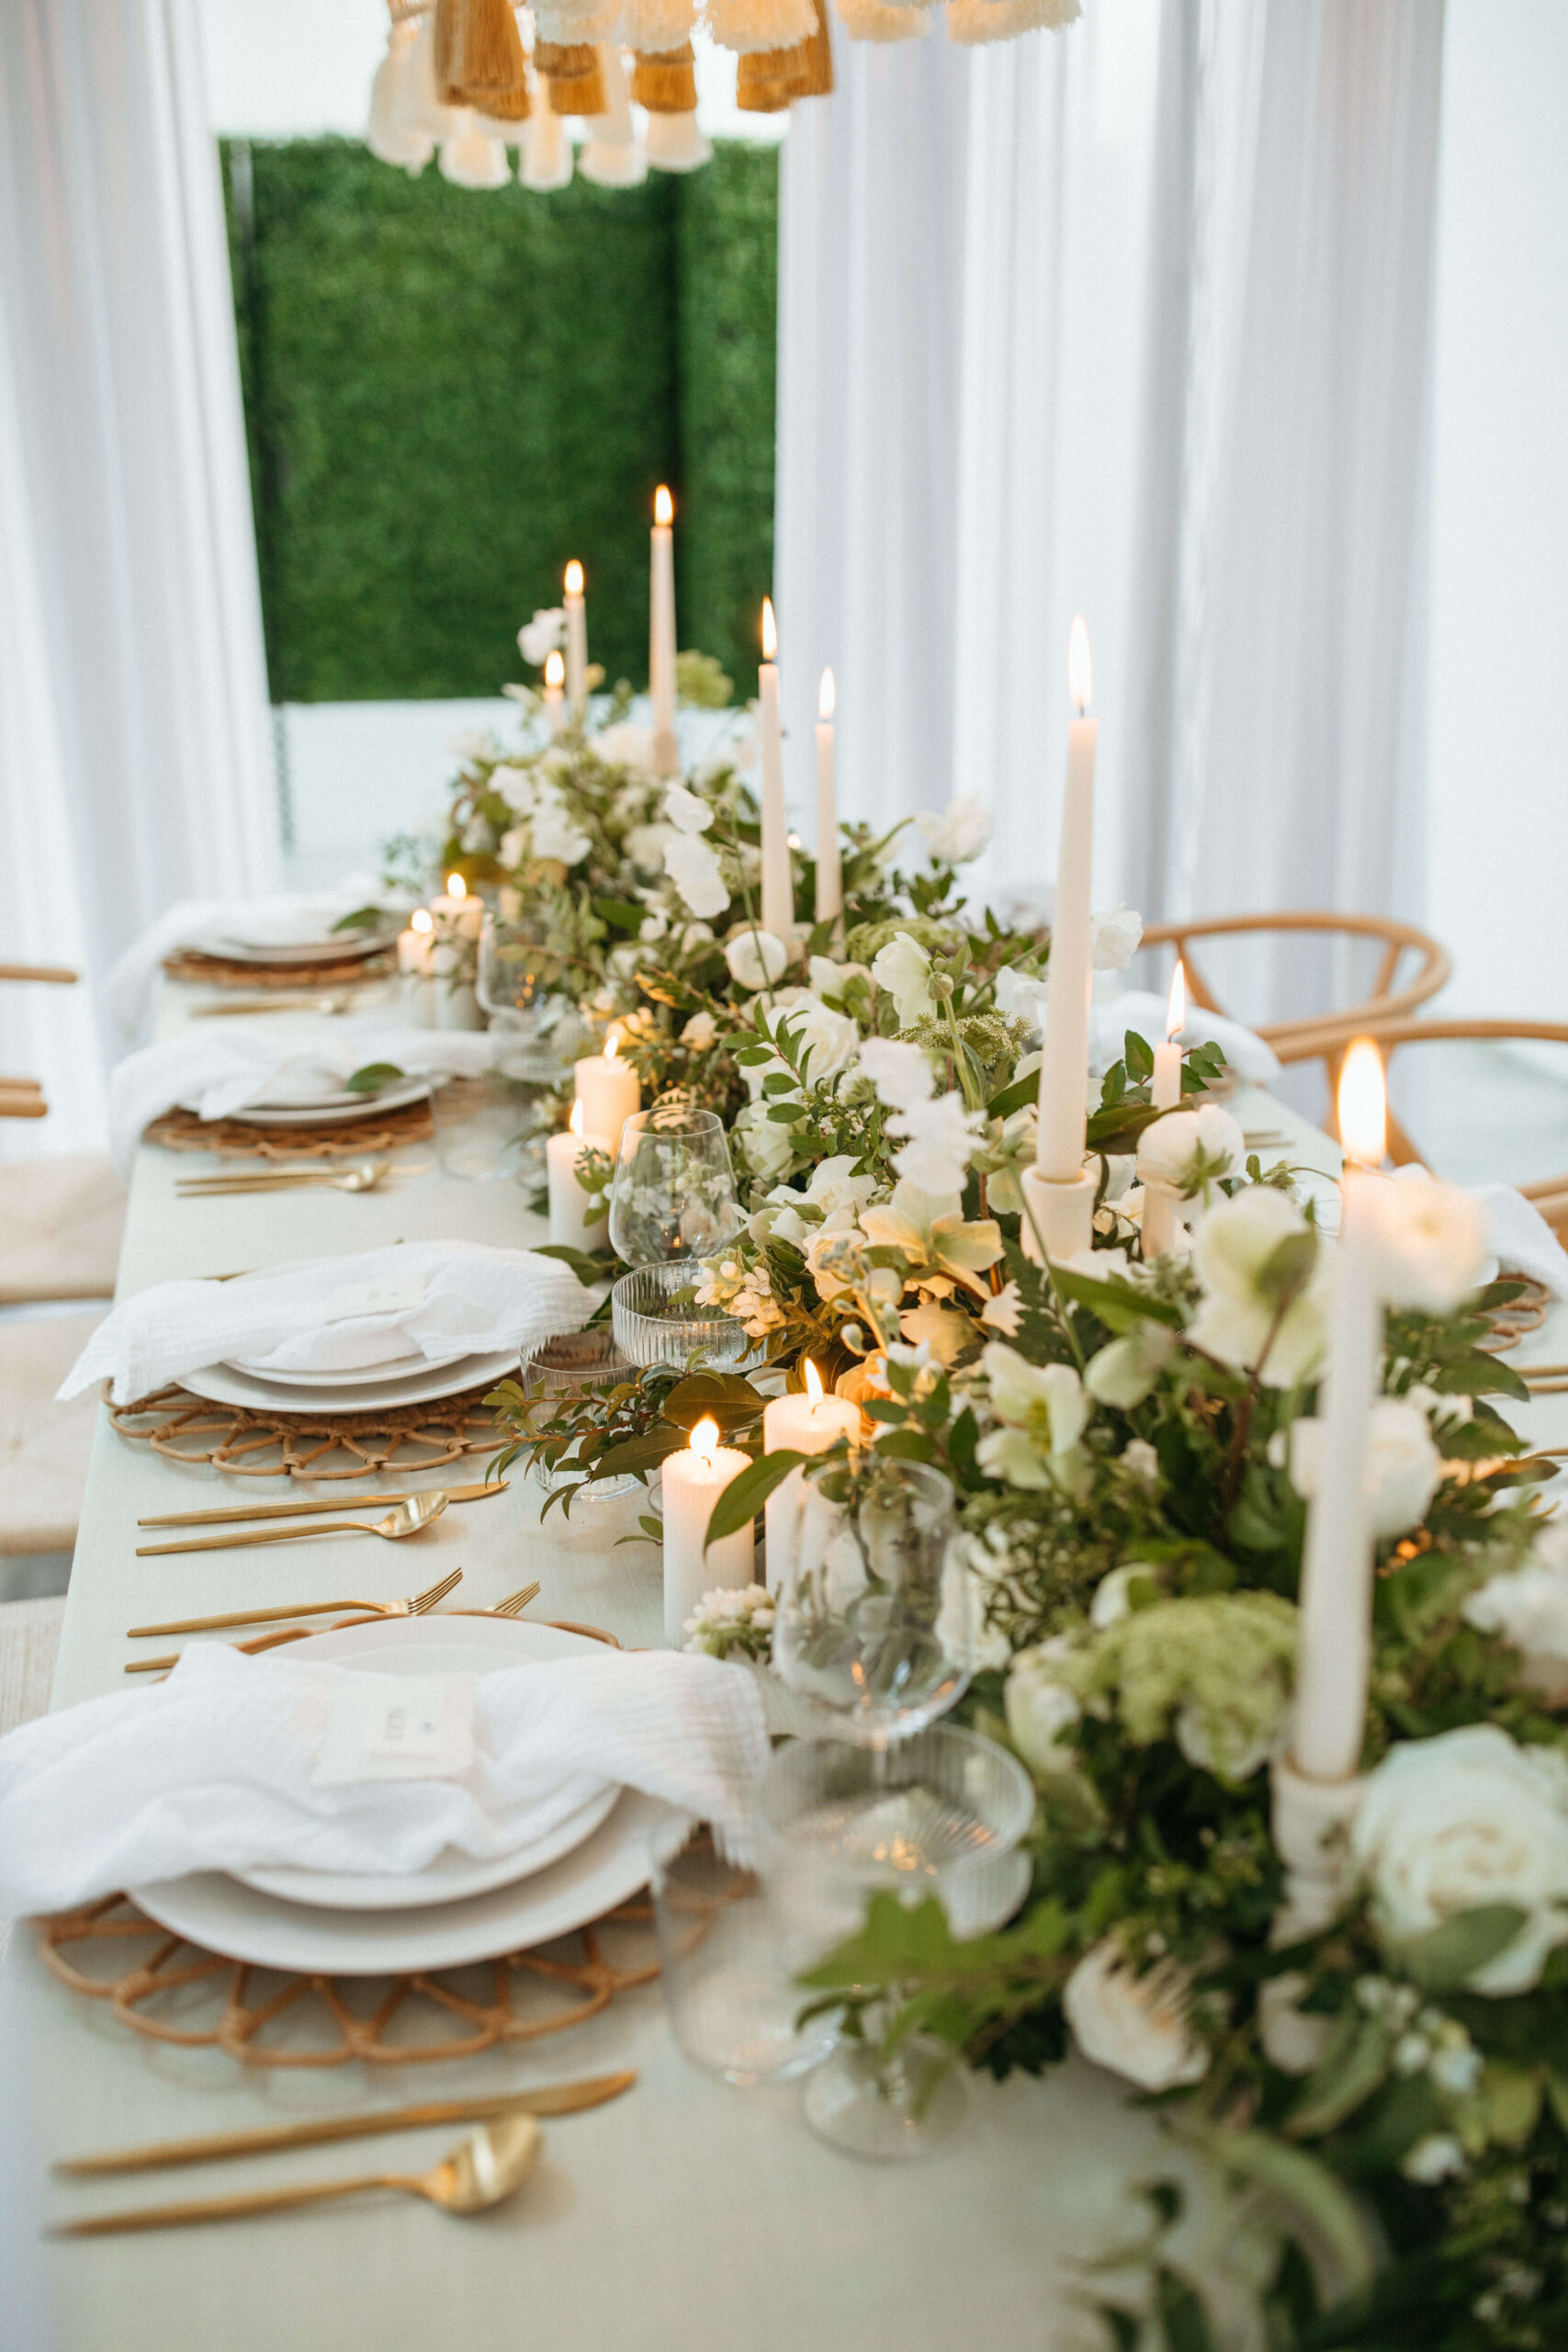 White and green table setting with gold details at a NYC wedding venue styled shoot